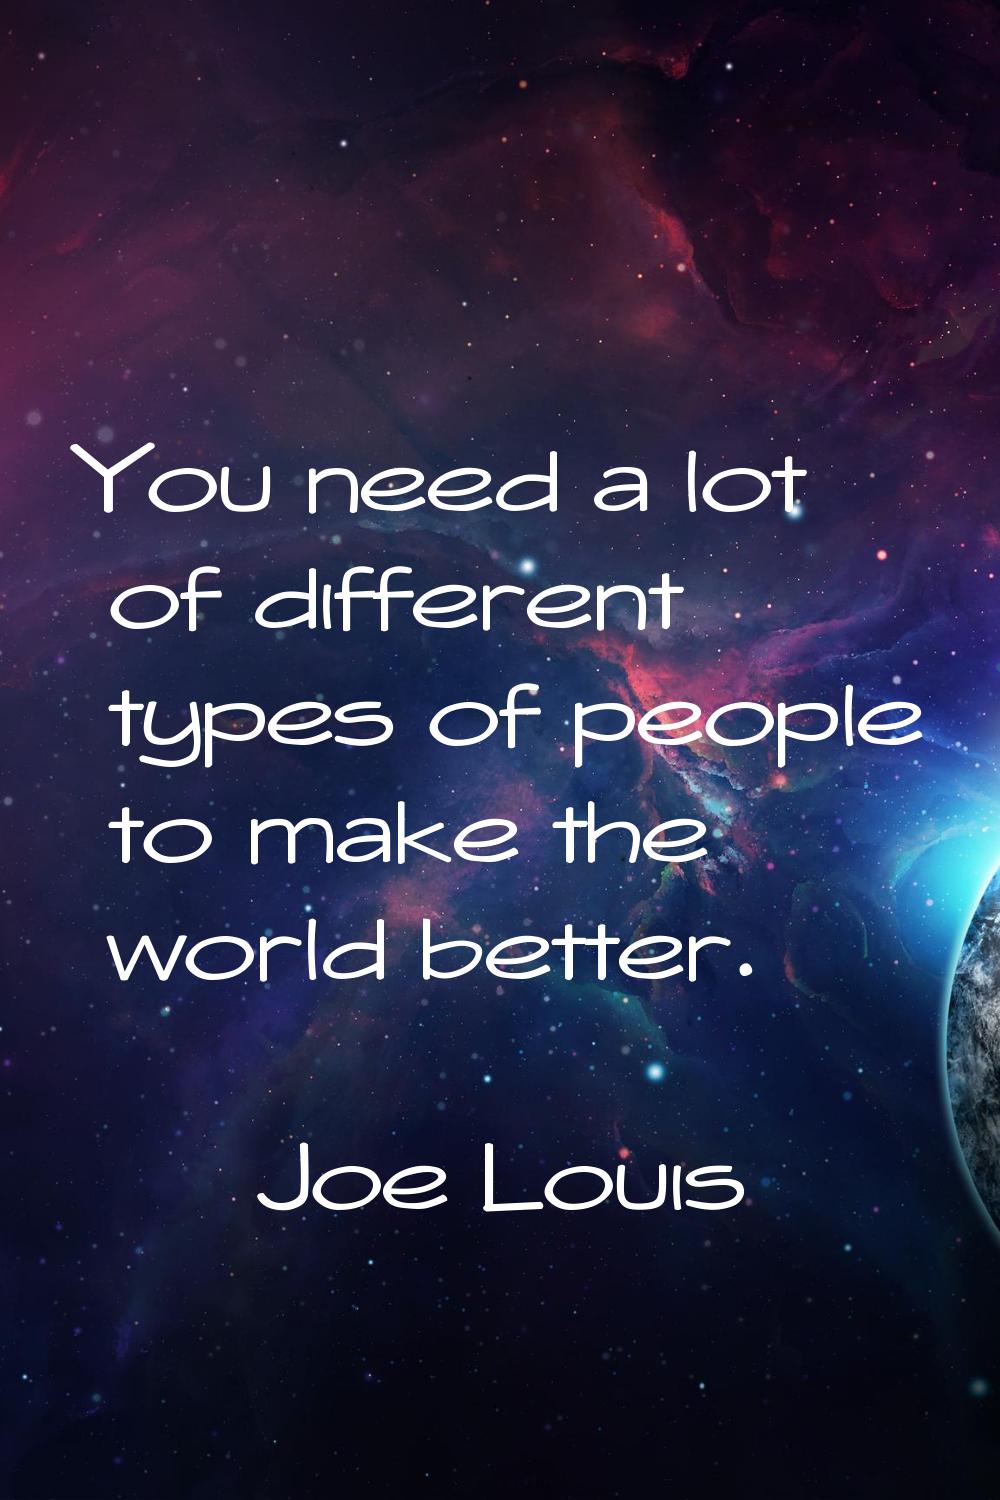 You need a lot of different types of people to make the world better.